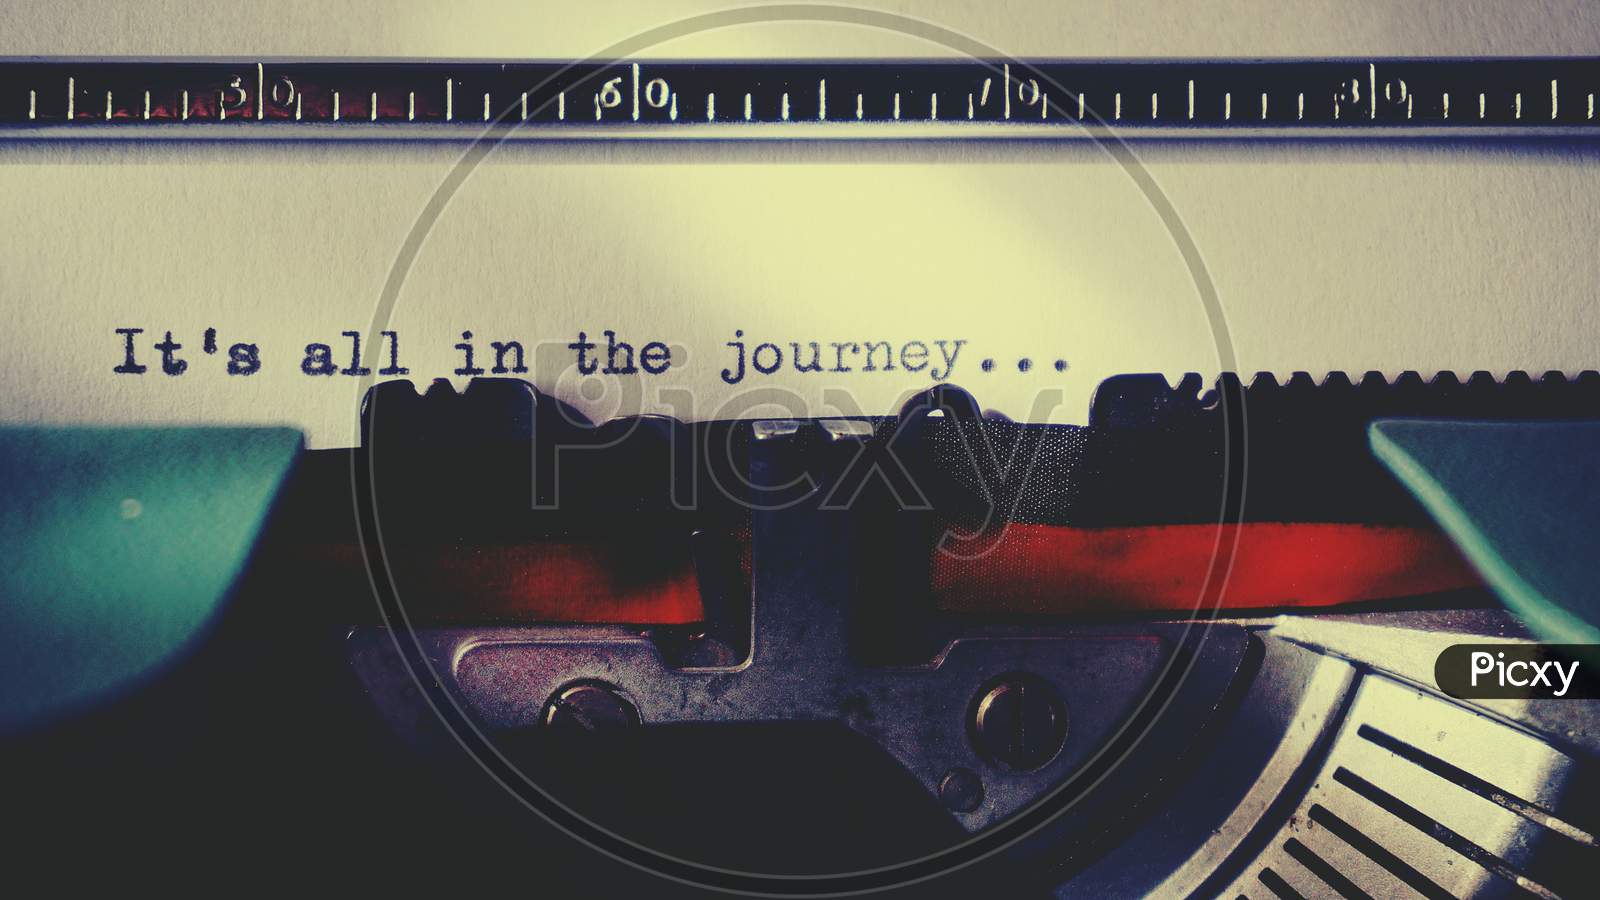 Black Typewriter Machine Typing Life's Quote "It's all in the Journey " on White Printer Paper.